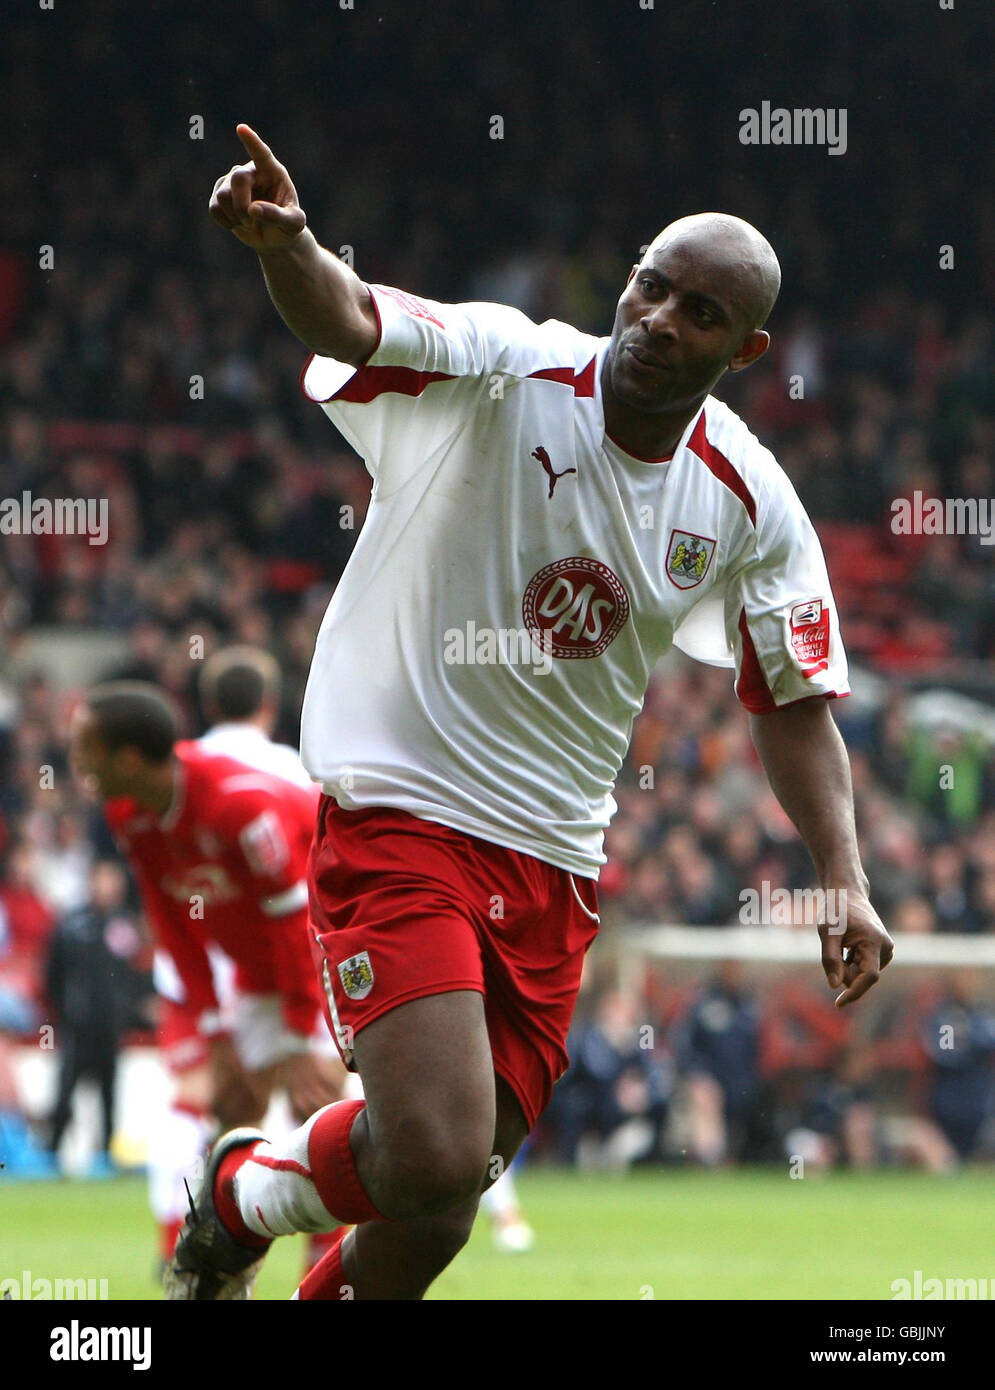 Bristol City's Dele Adebola celebrates scoring their second goal of the game during the Coca-Cola Football League Championship match at the City Ground, Nottingham. Stock Photo